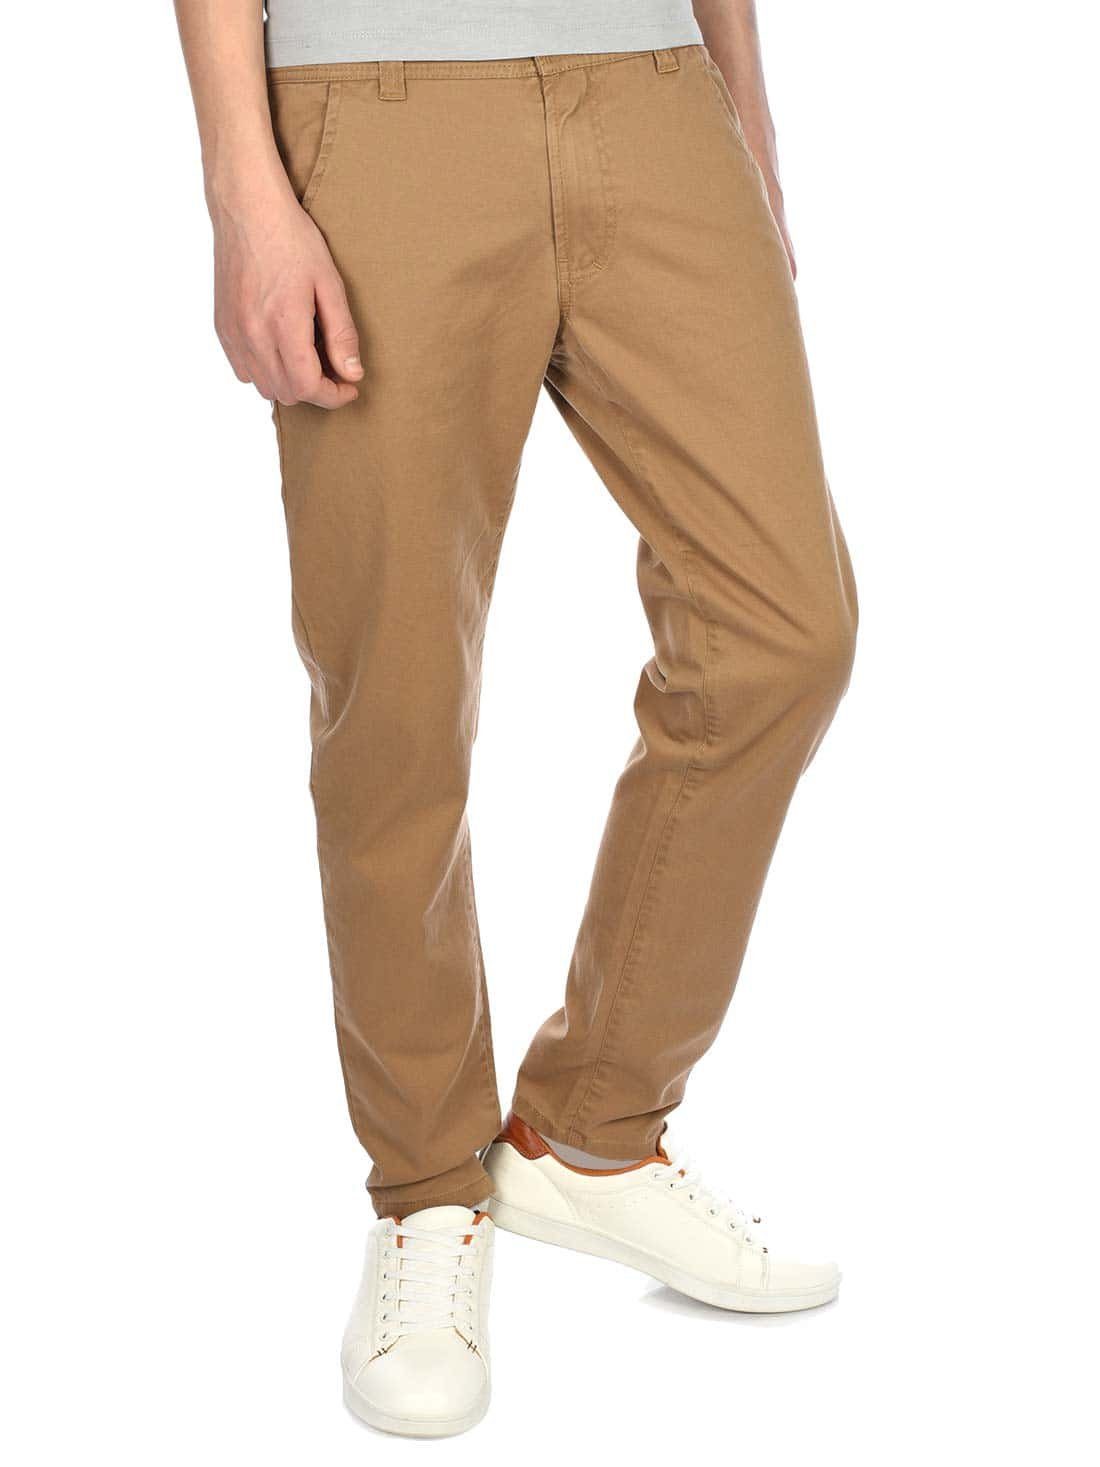 BEZLIT Chinohose Jungen Chino Hose casual (1-tlg) Beige